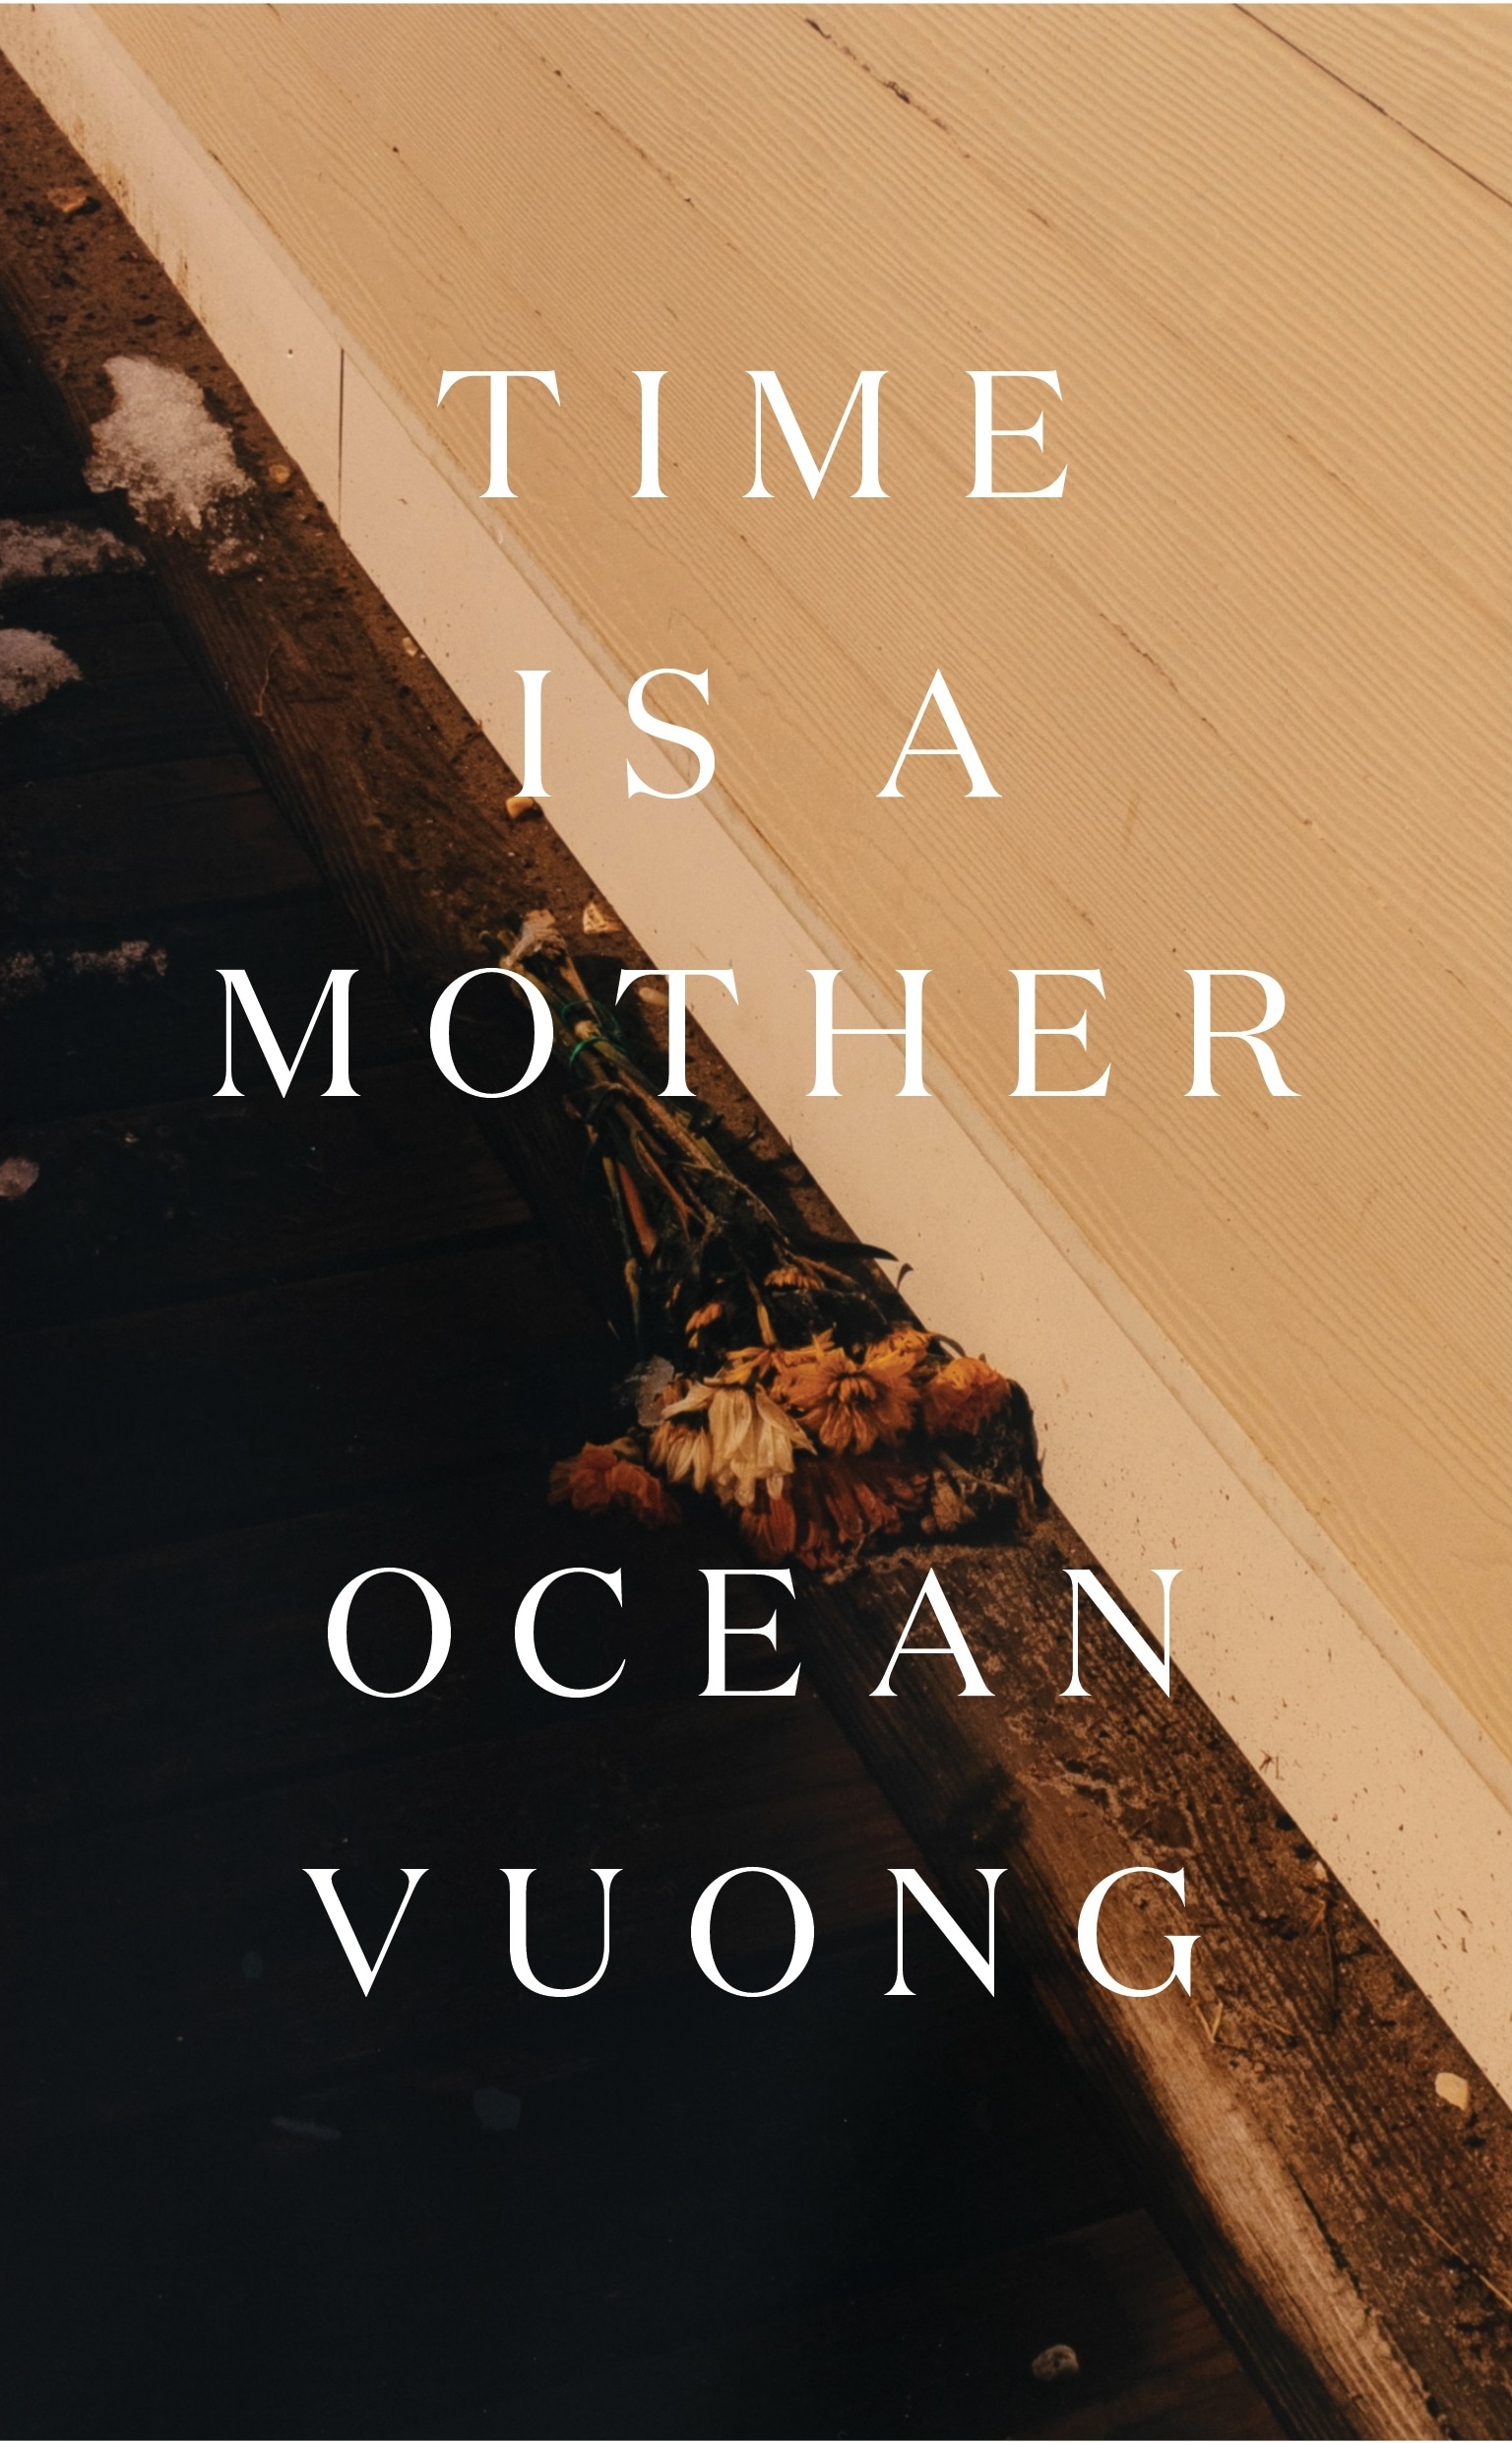 Book “Time is a Mother” by Ocean Vuong — April 6, 2023